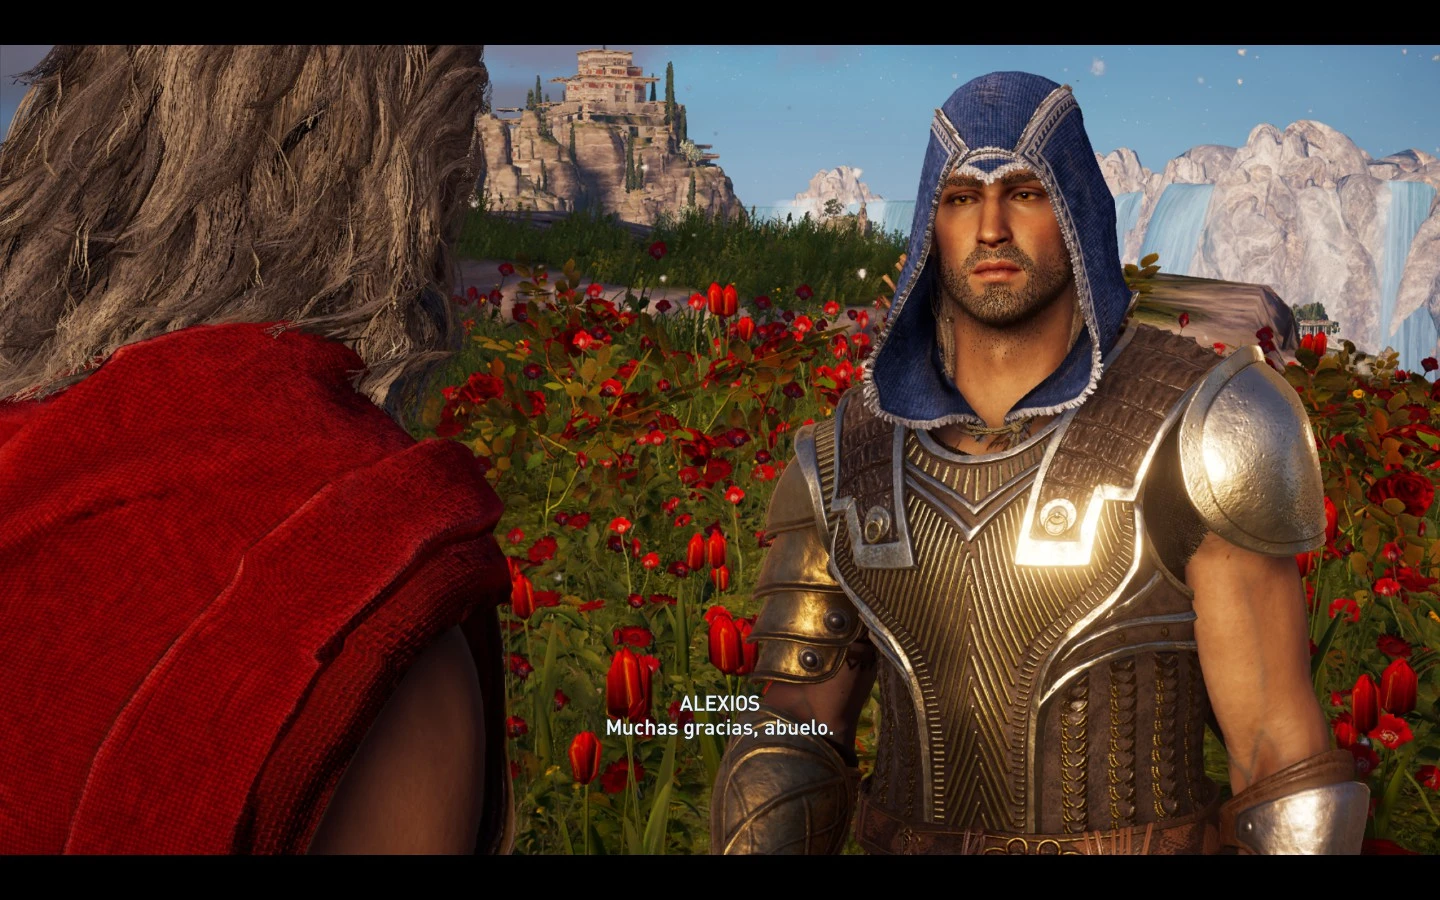 Assassin's Creed Odyssey mods you can enjoy while waiting for Valhalla